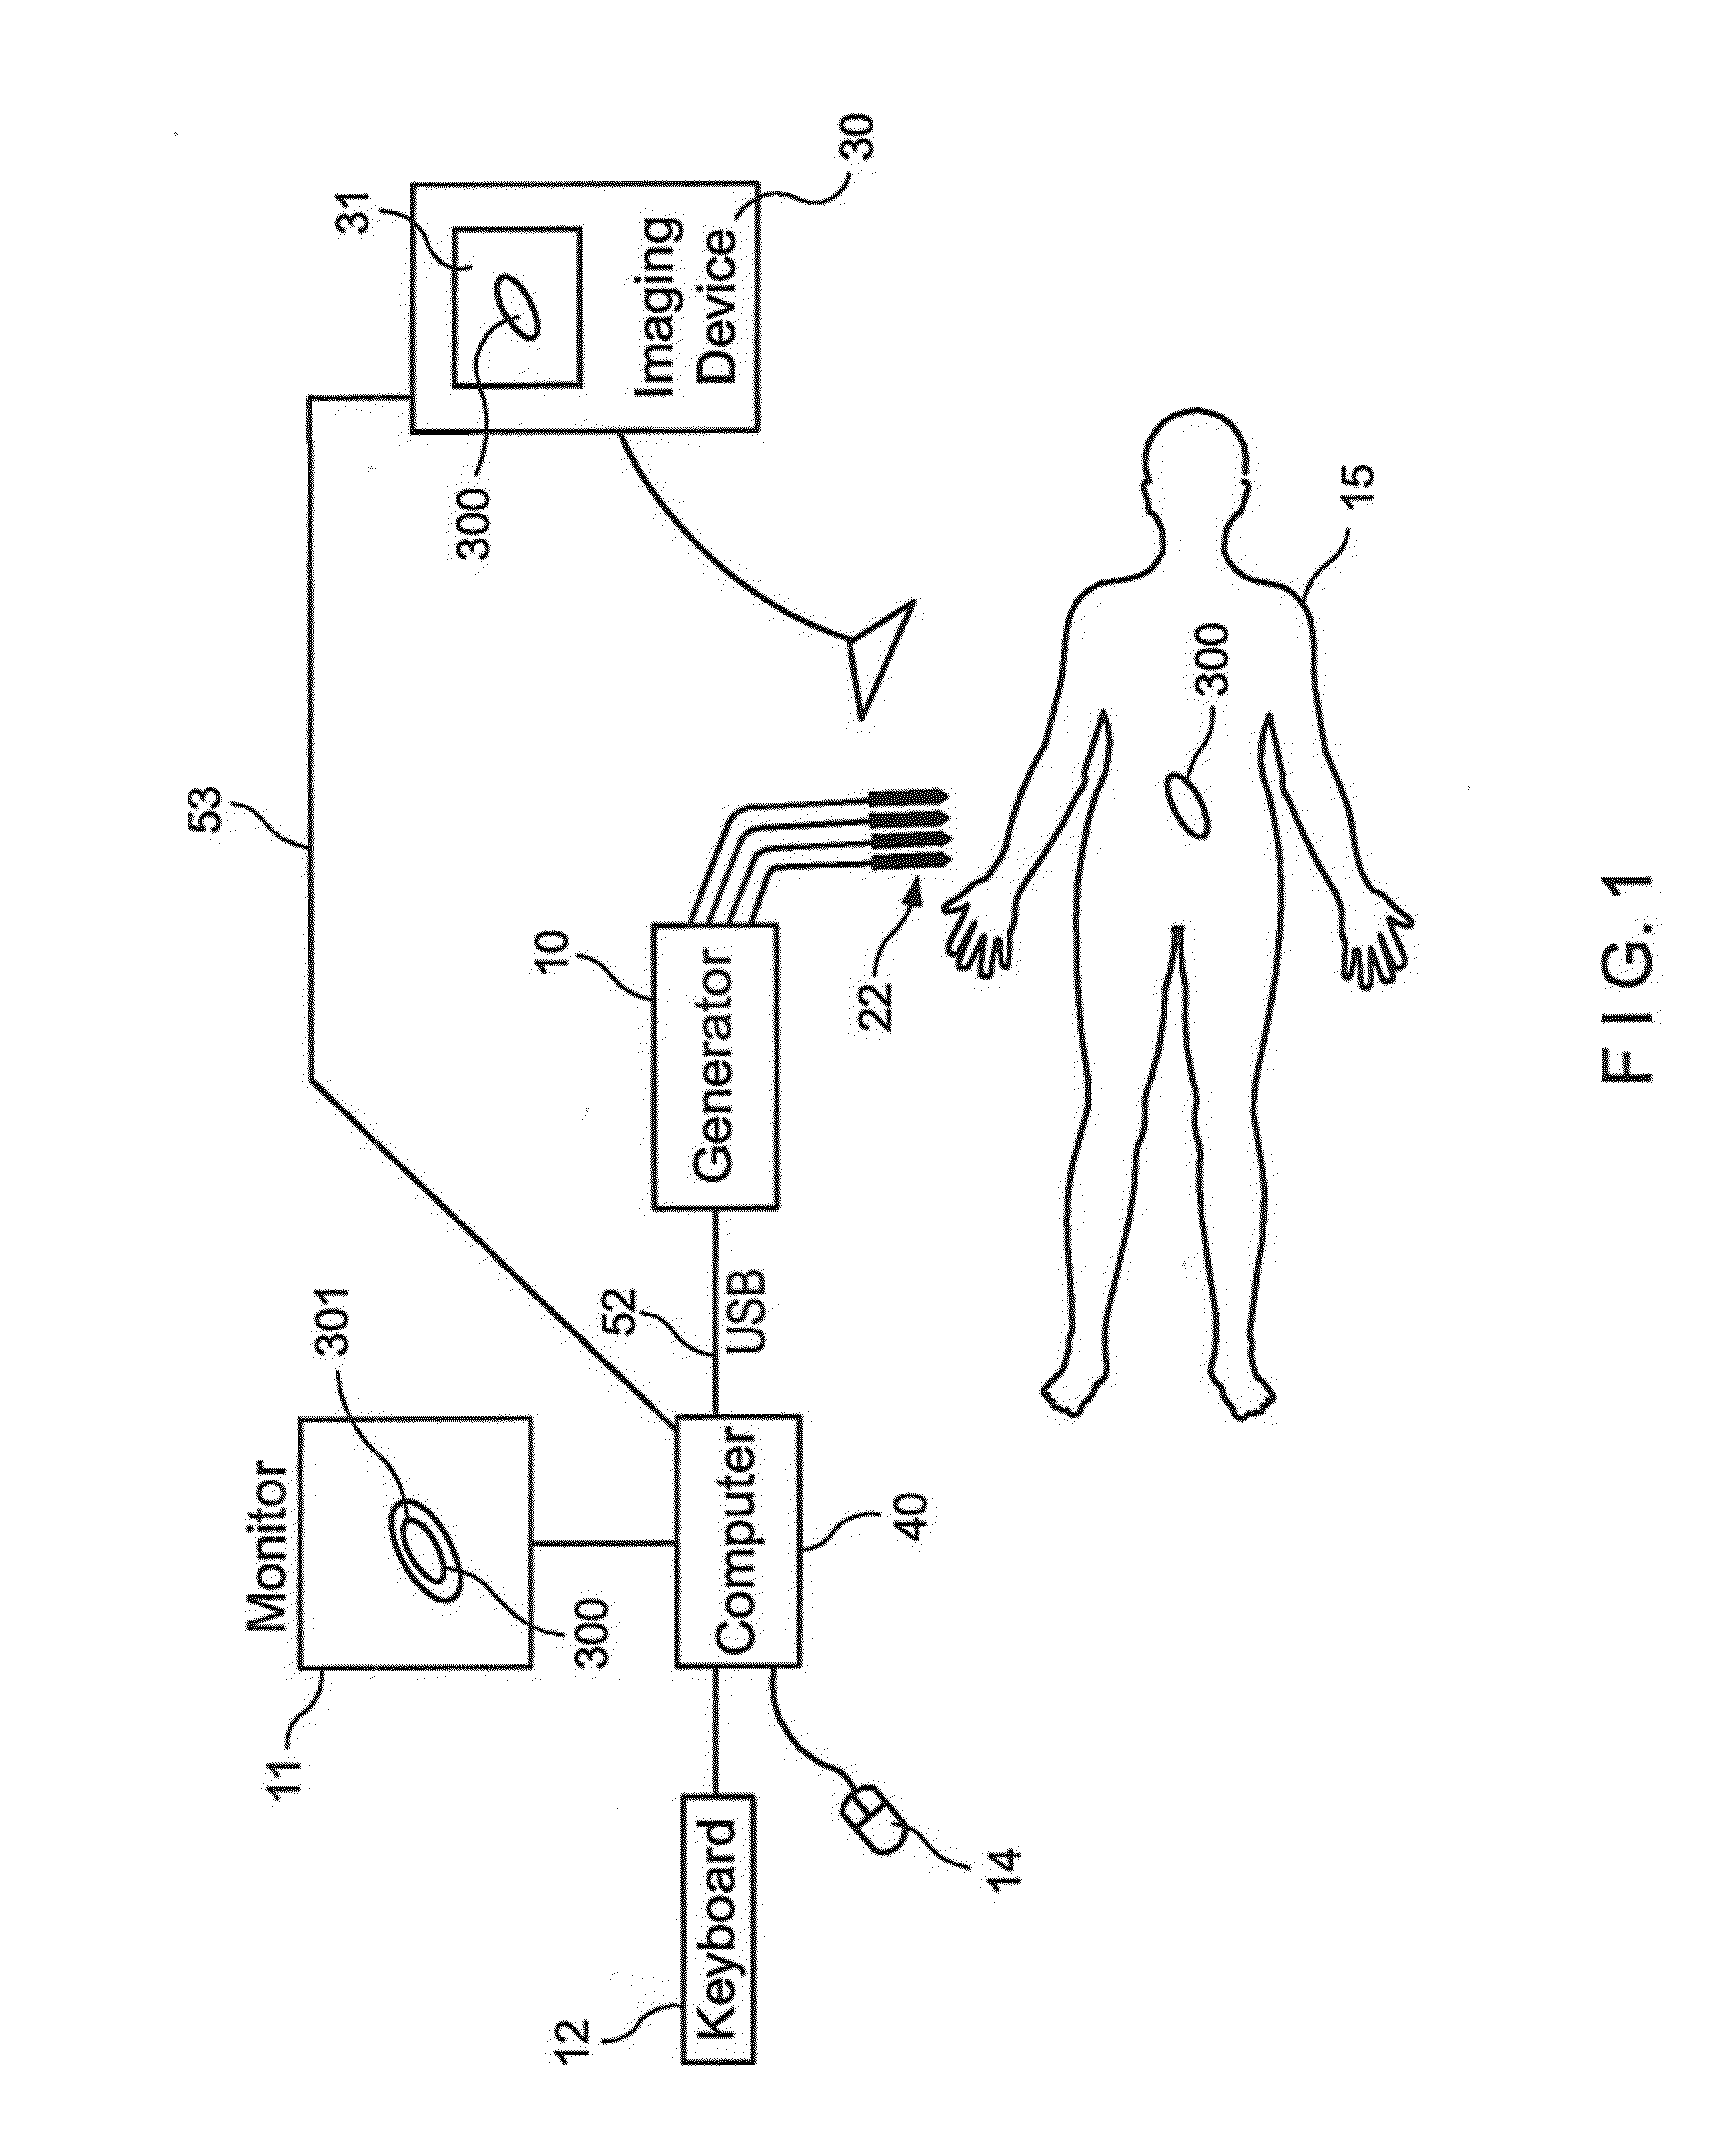 Methods of Sterilization and Treating Infection Using Irreversible Electroporation